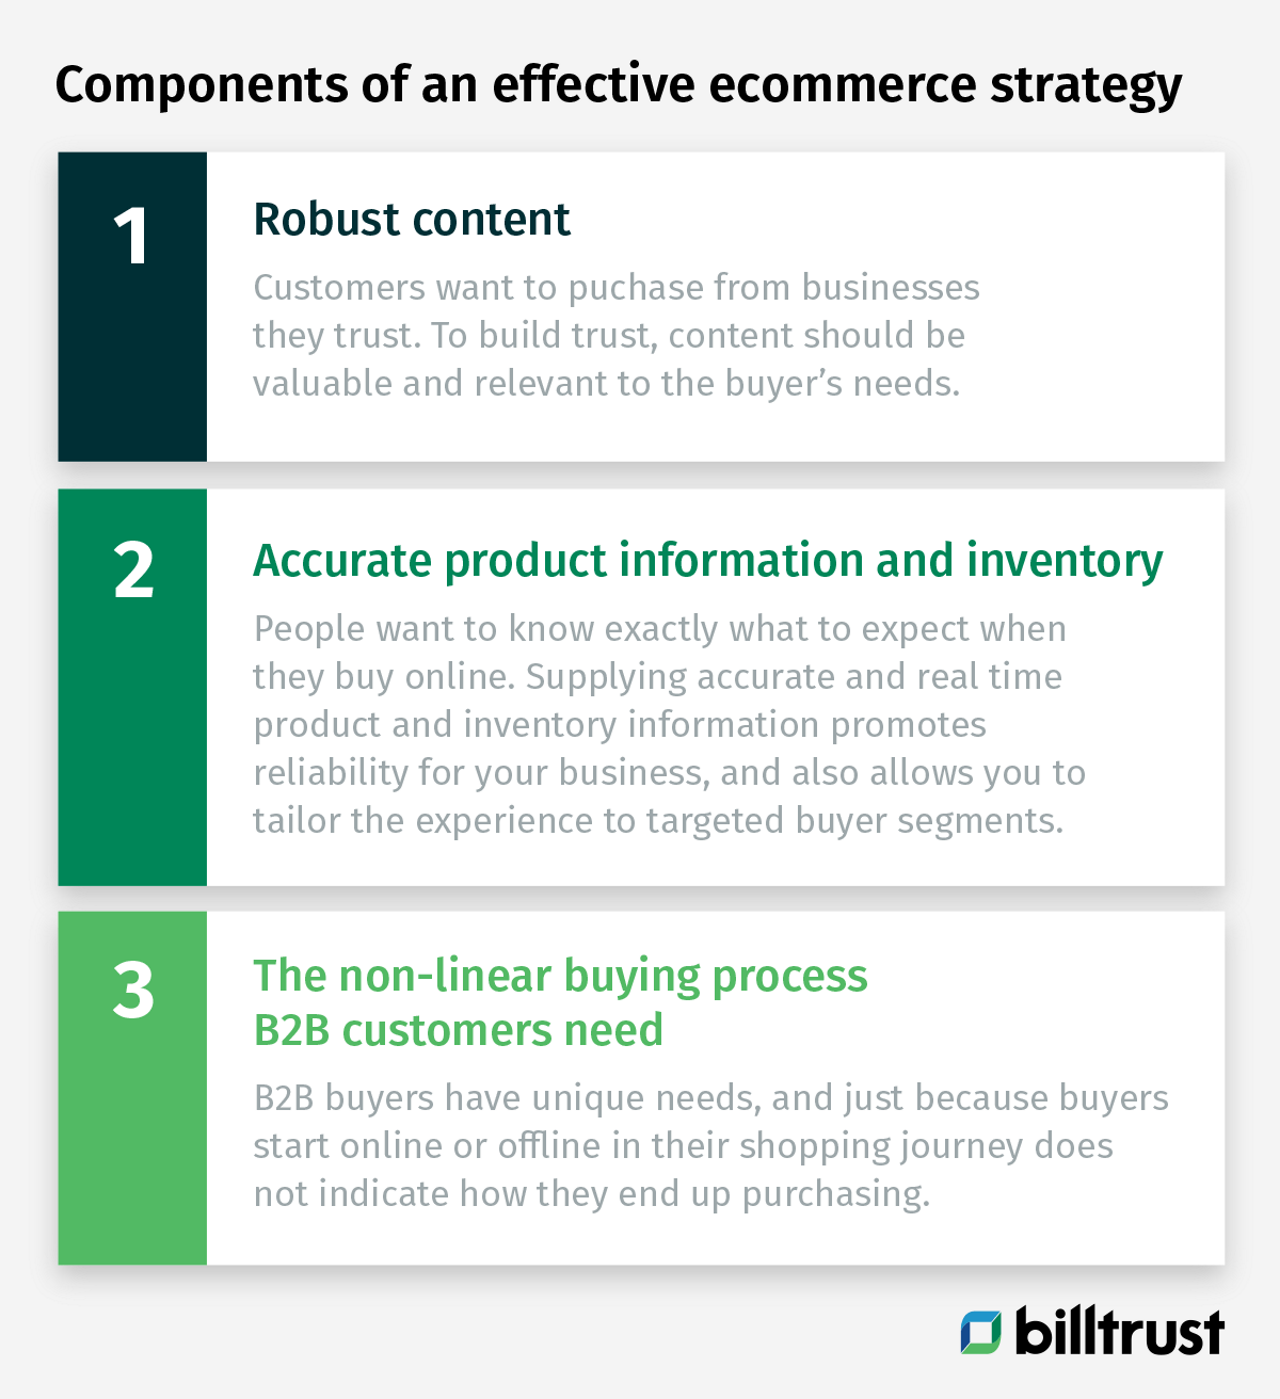 supply chain and the 3 components of an effective eCommerce strategy